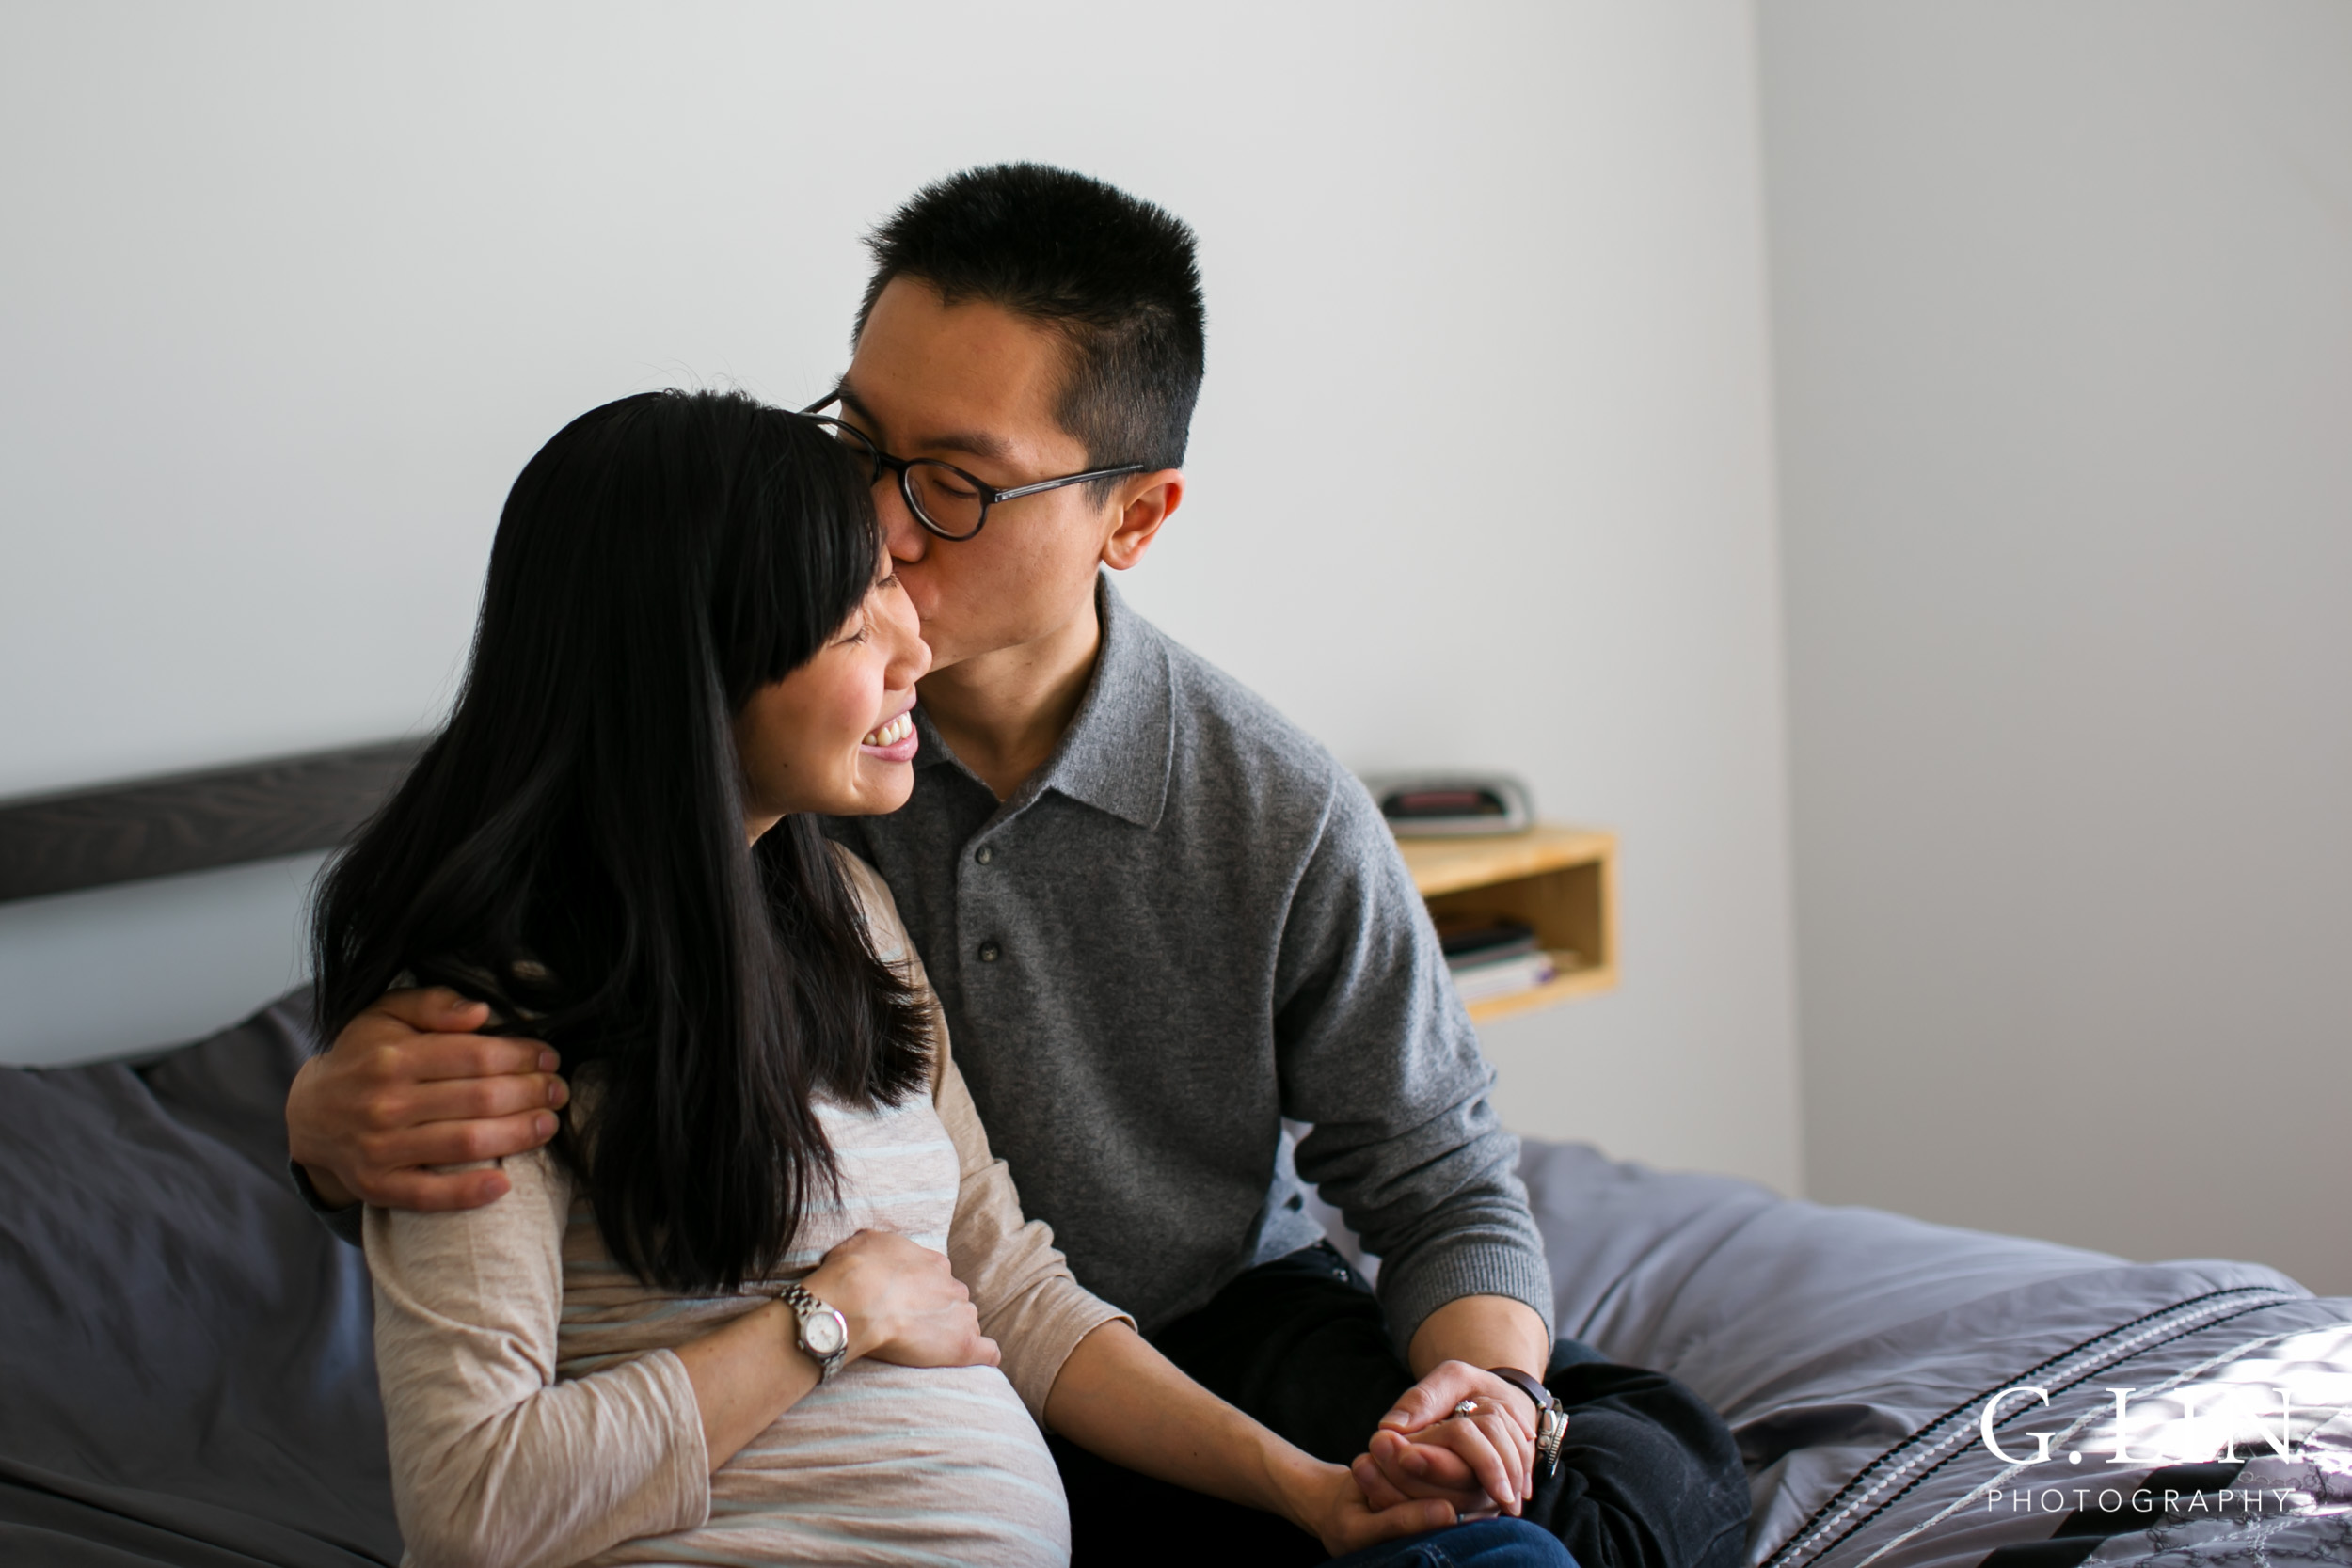 Durham Maternity Photography | G. Lin Photography | Husband kissing wife on cheek sitting on bed